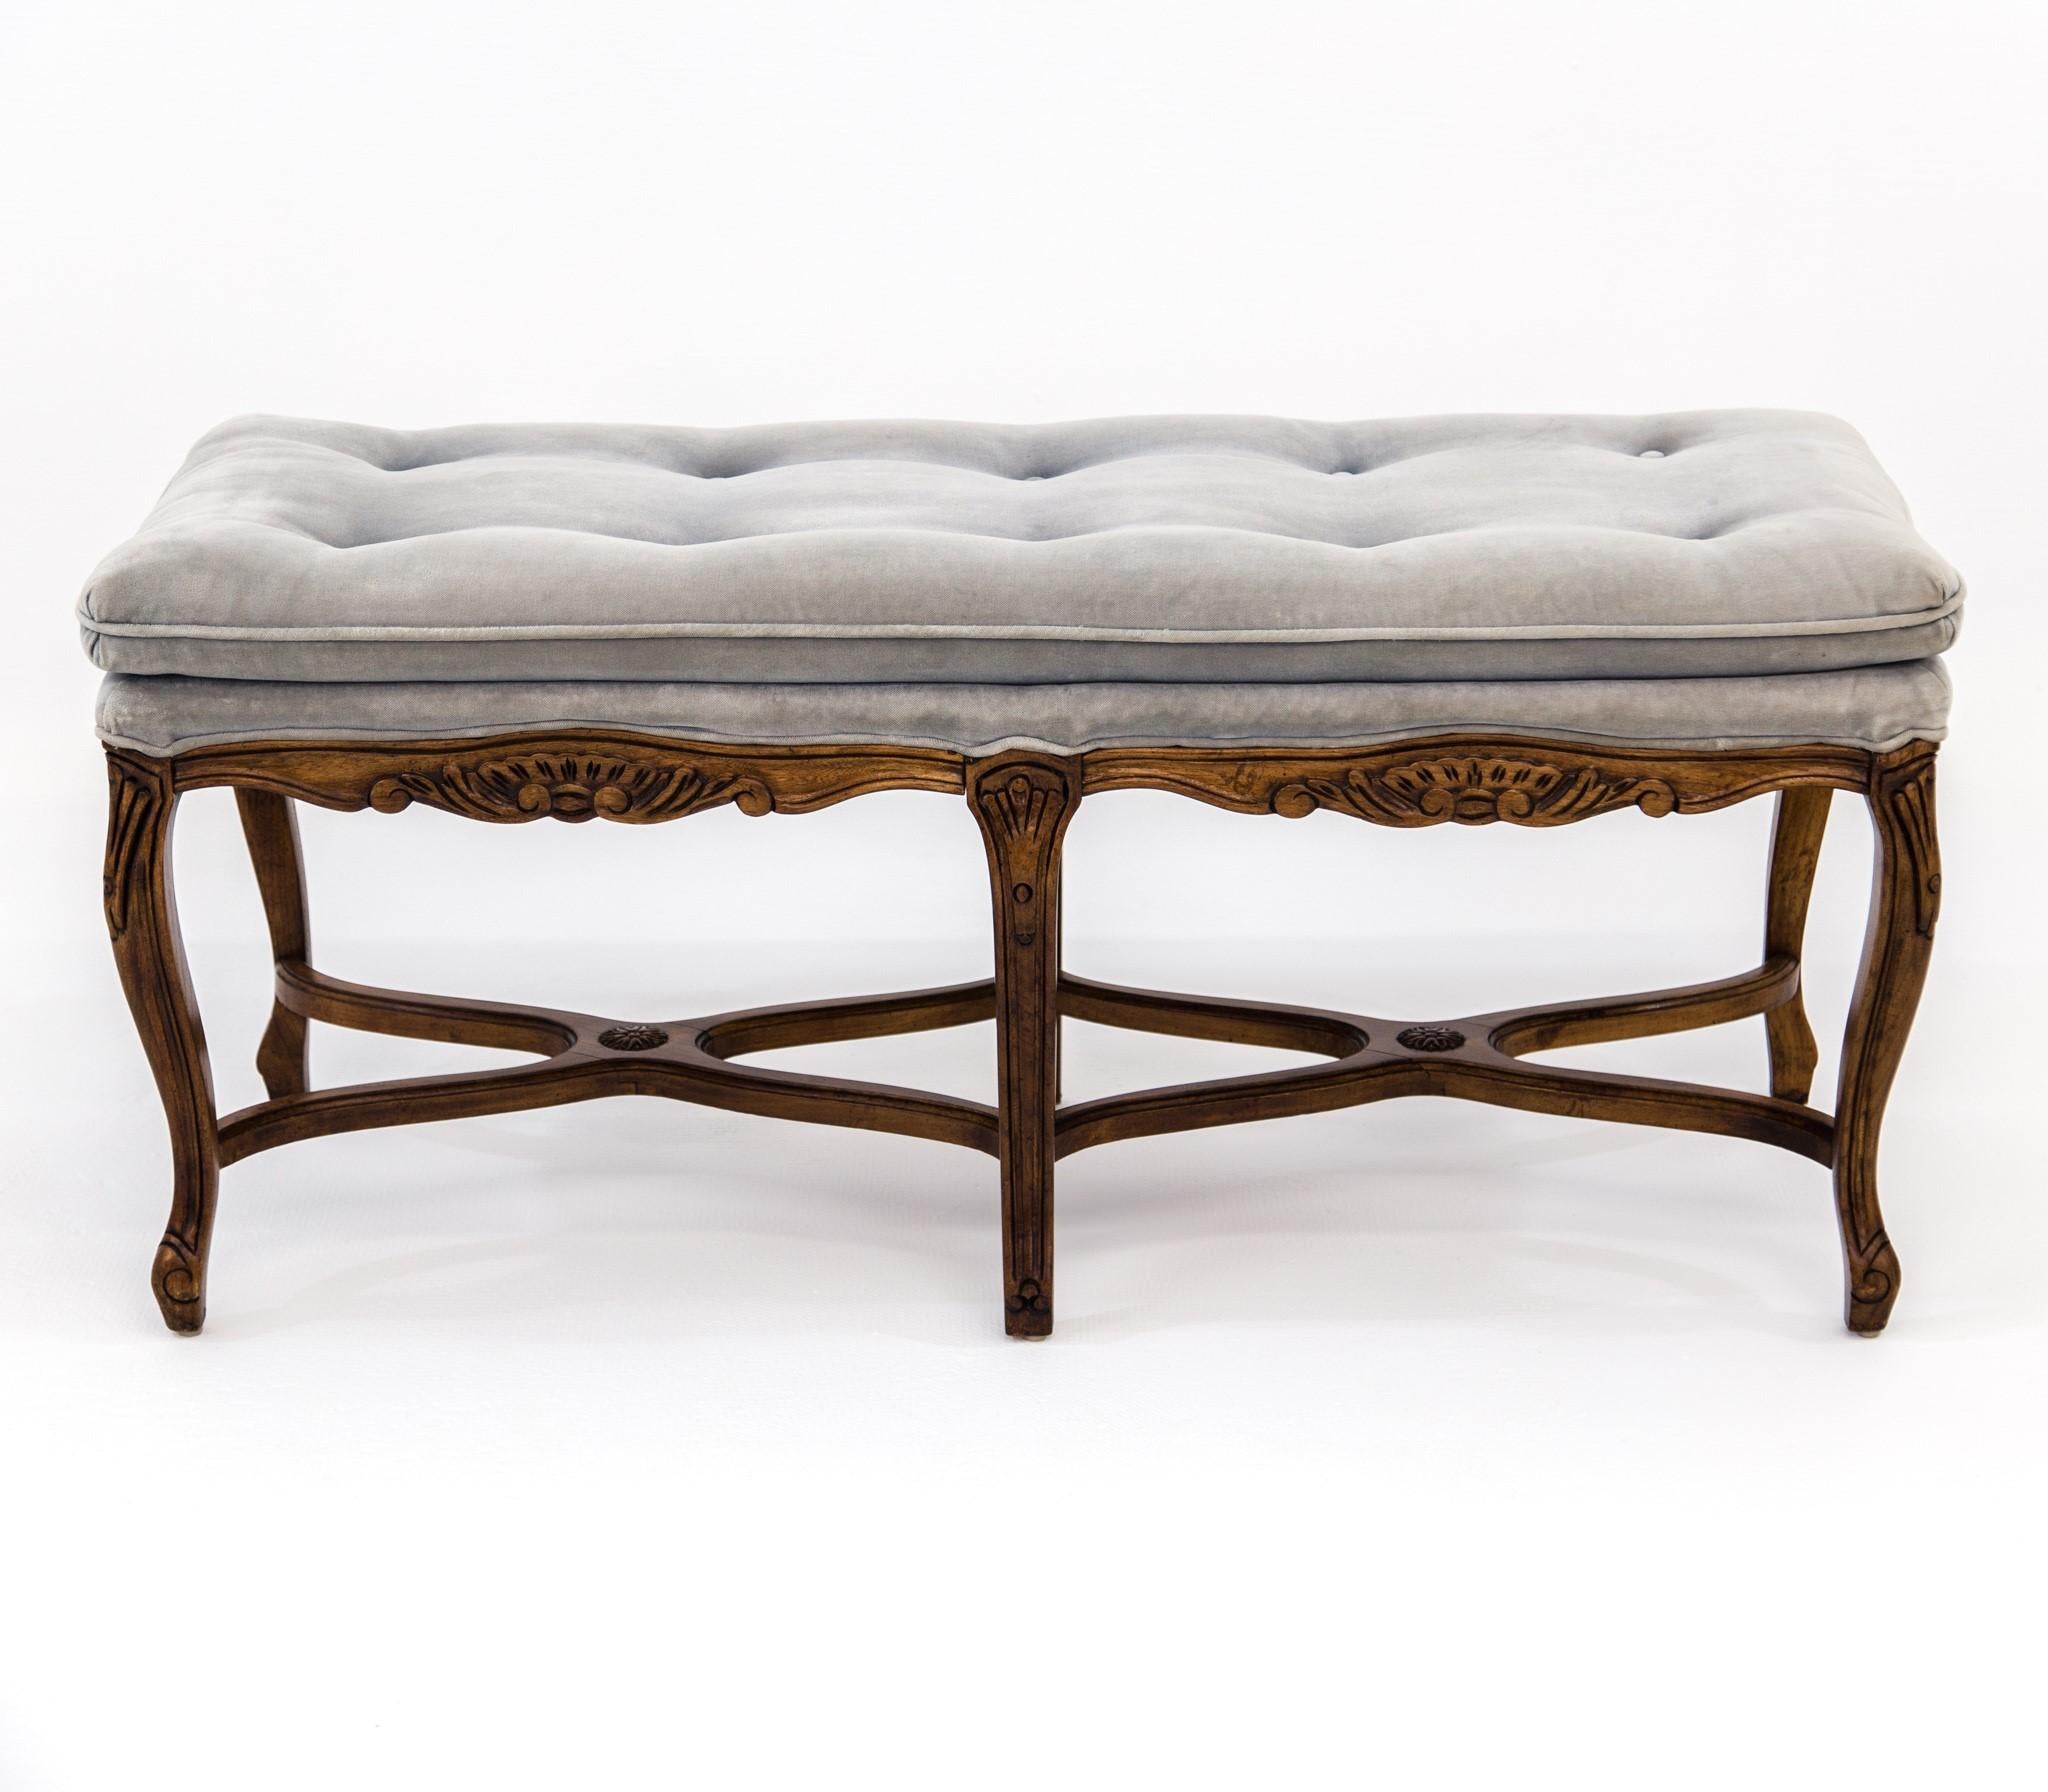 North American Louis XV Carved Walnut Bench with Gray Tufted Velvet Upholstery by Bernhardt